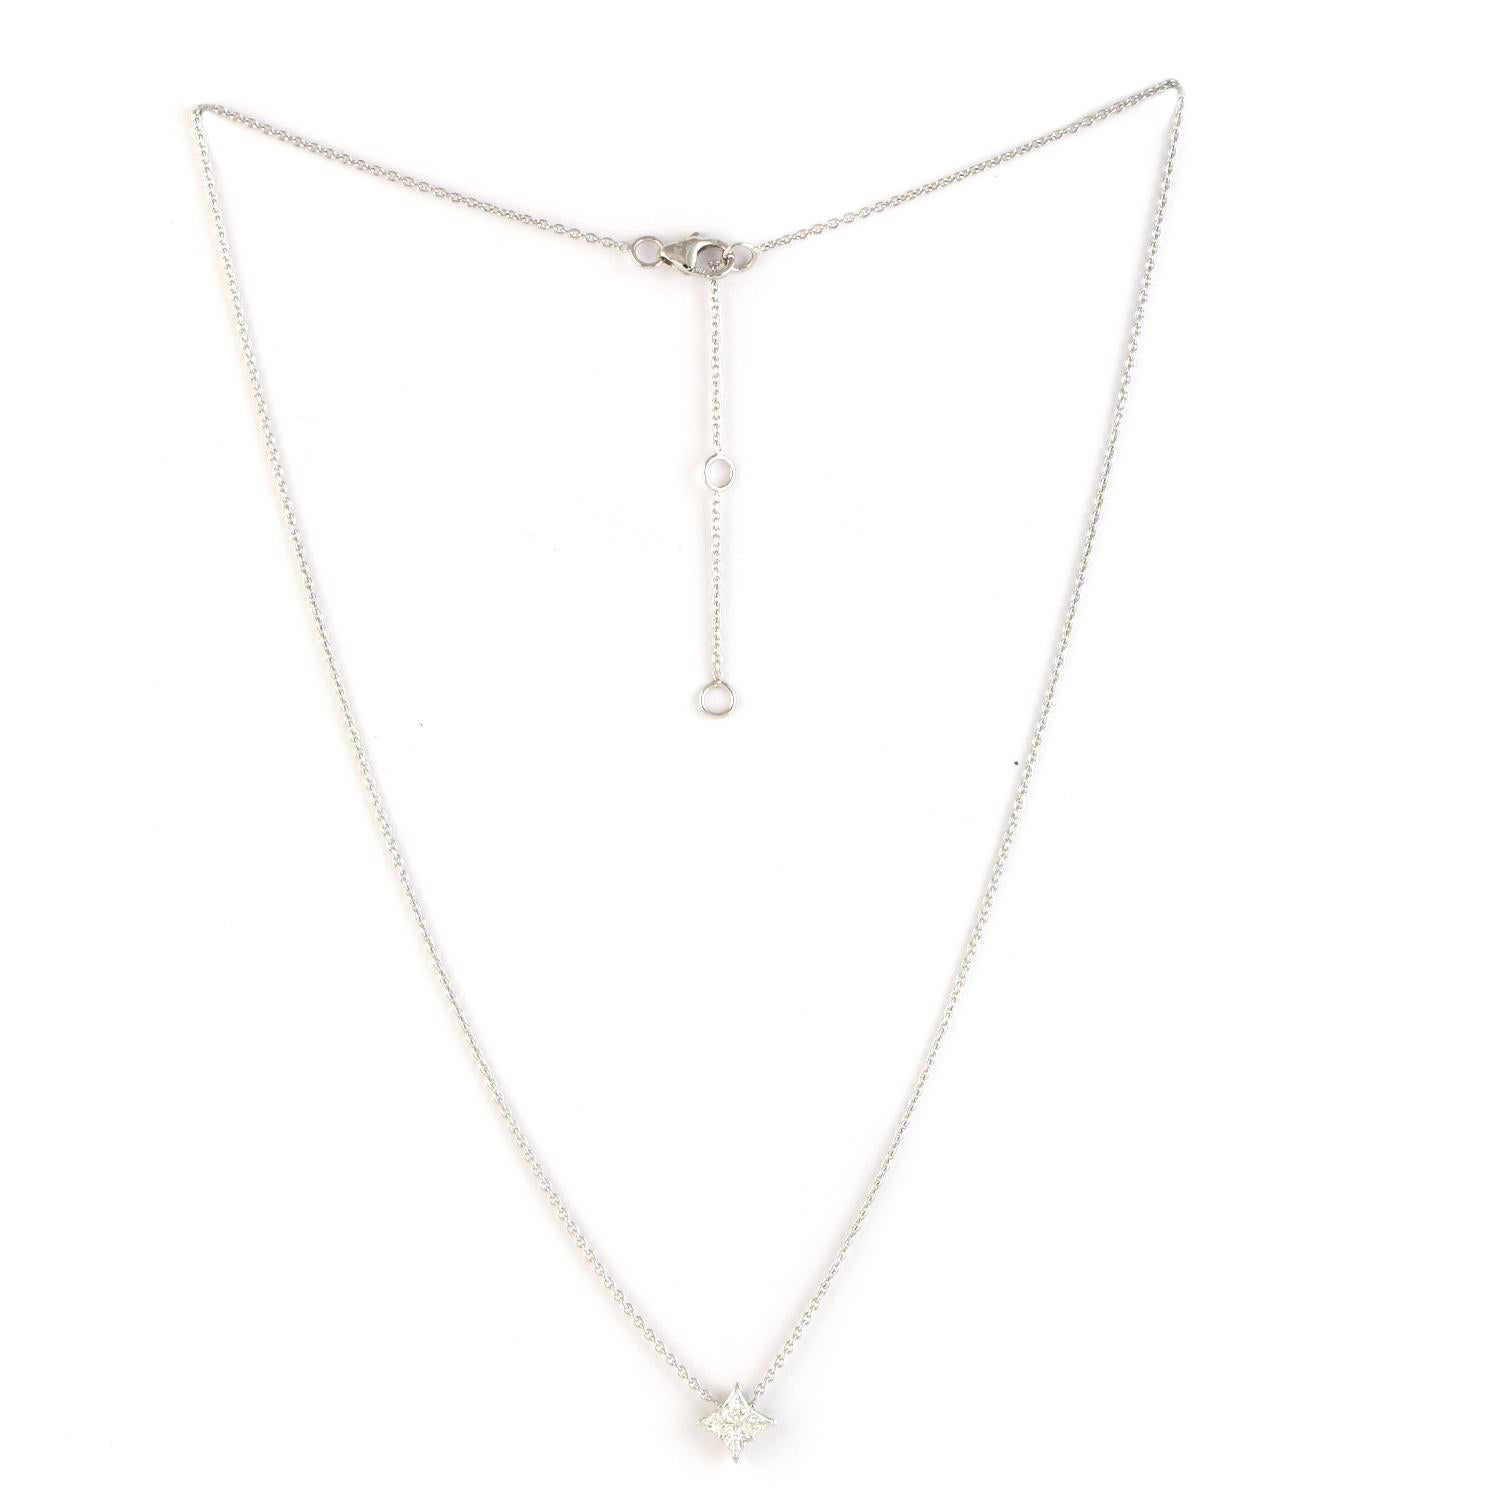 Artisan Stunning Necklace with Diamond Studded Star Pendant Made in 18k White Gold For Sale